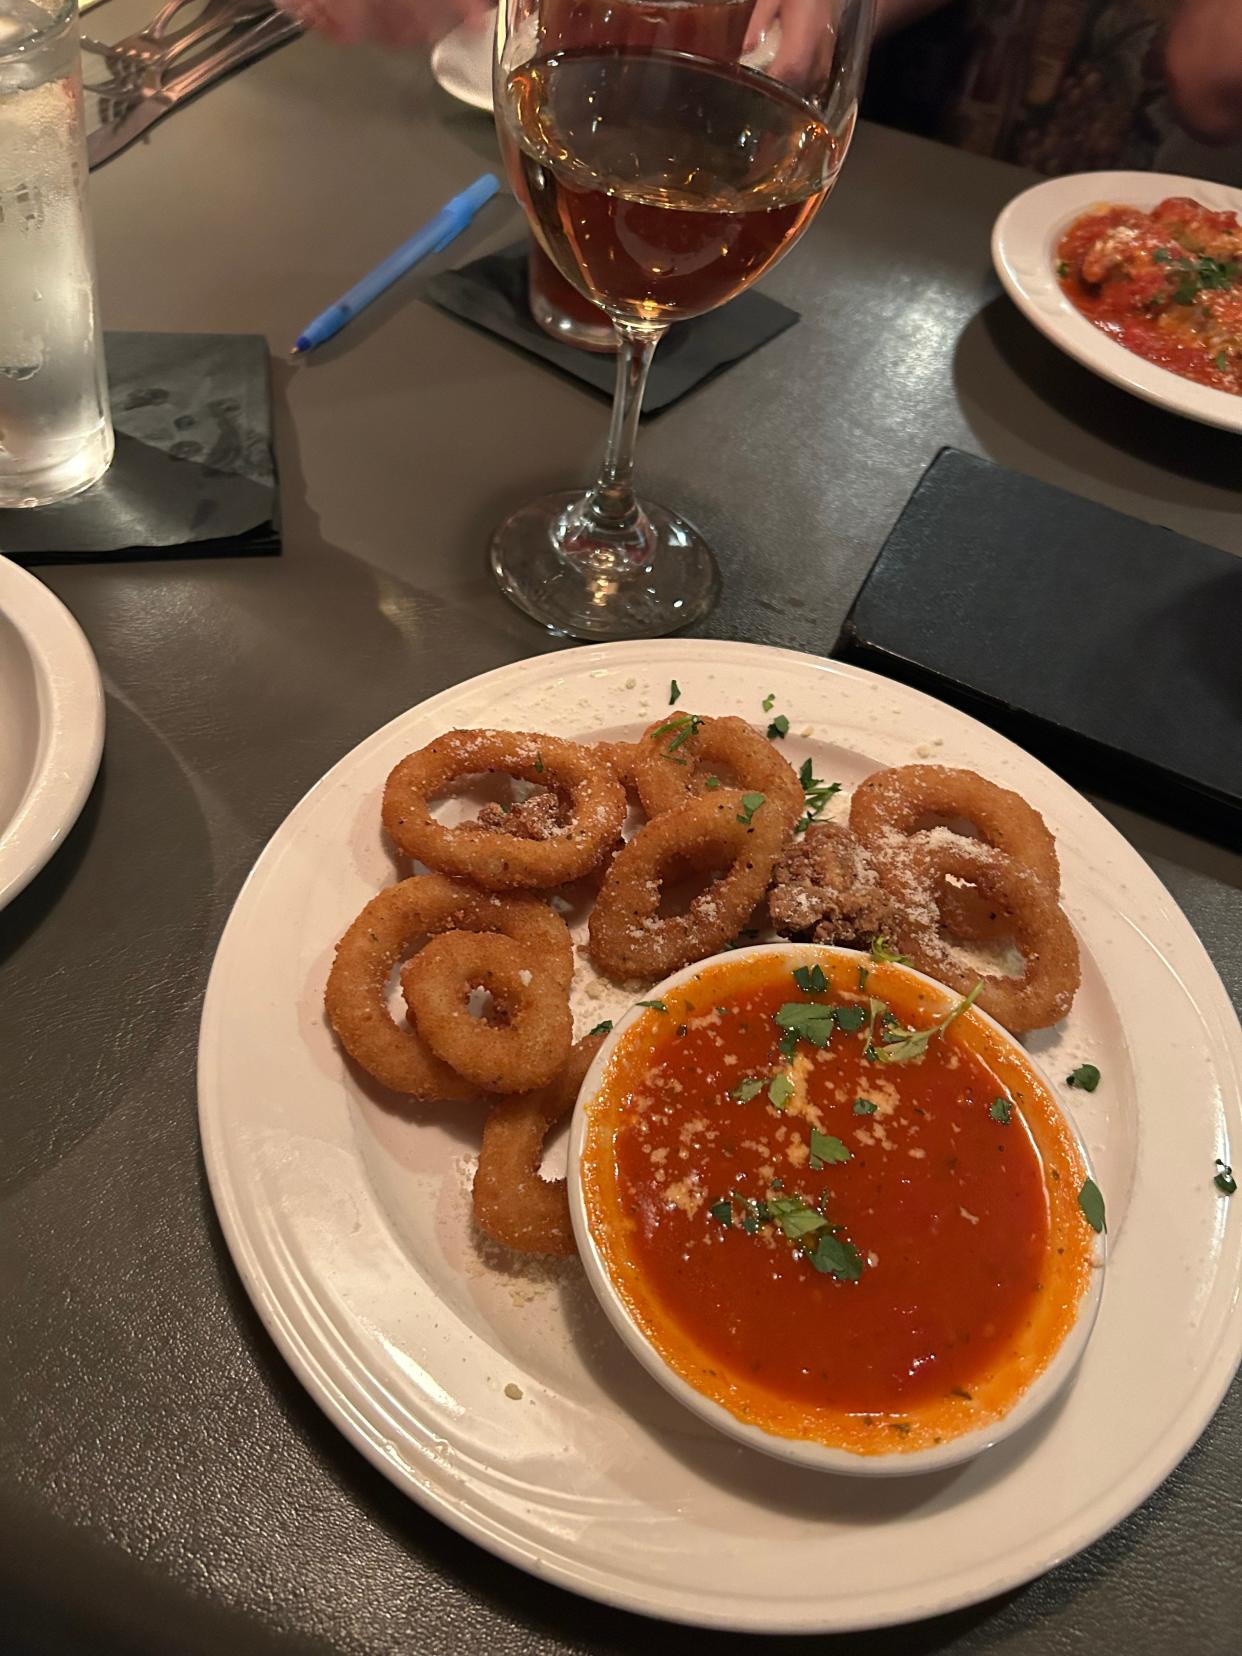 Lightly breaded calamari rings are served with marinara sauce at Santosuosso's in Medina Township.